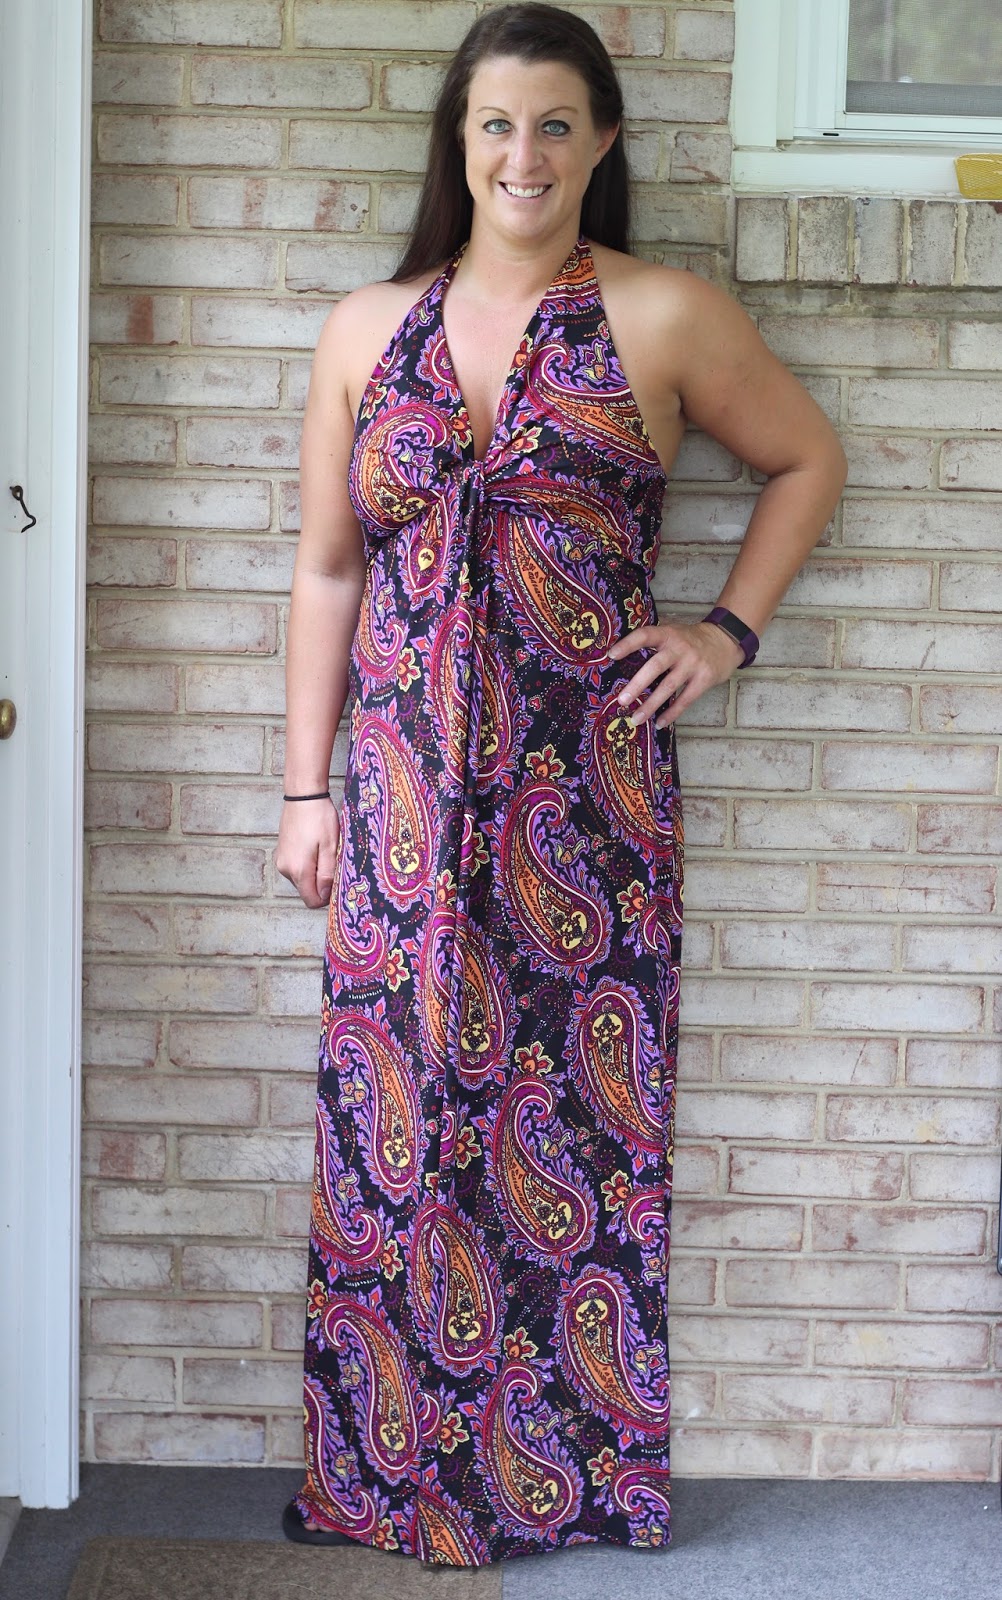 Ask Away Blog: Outfit of the Day: Paisley Pretty